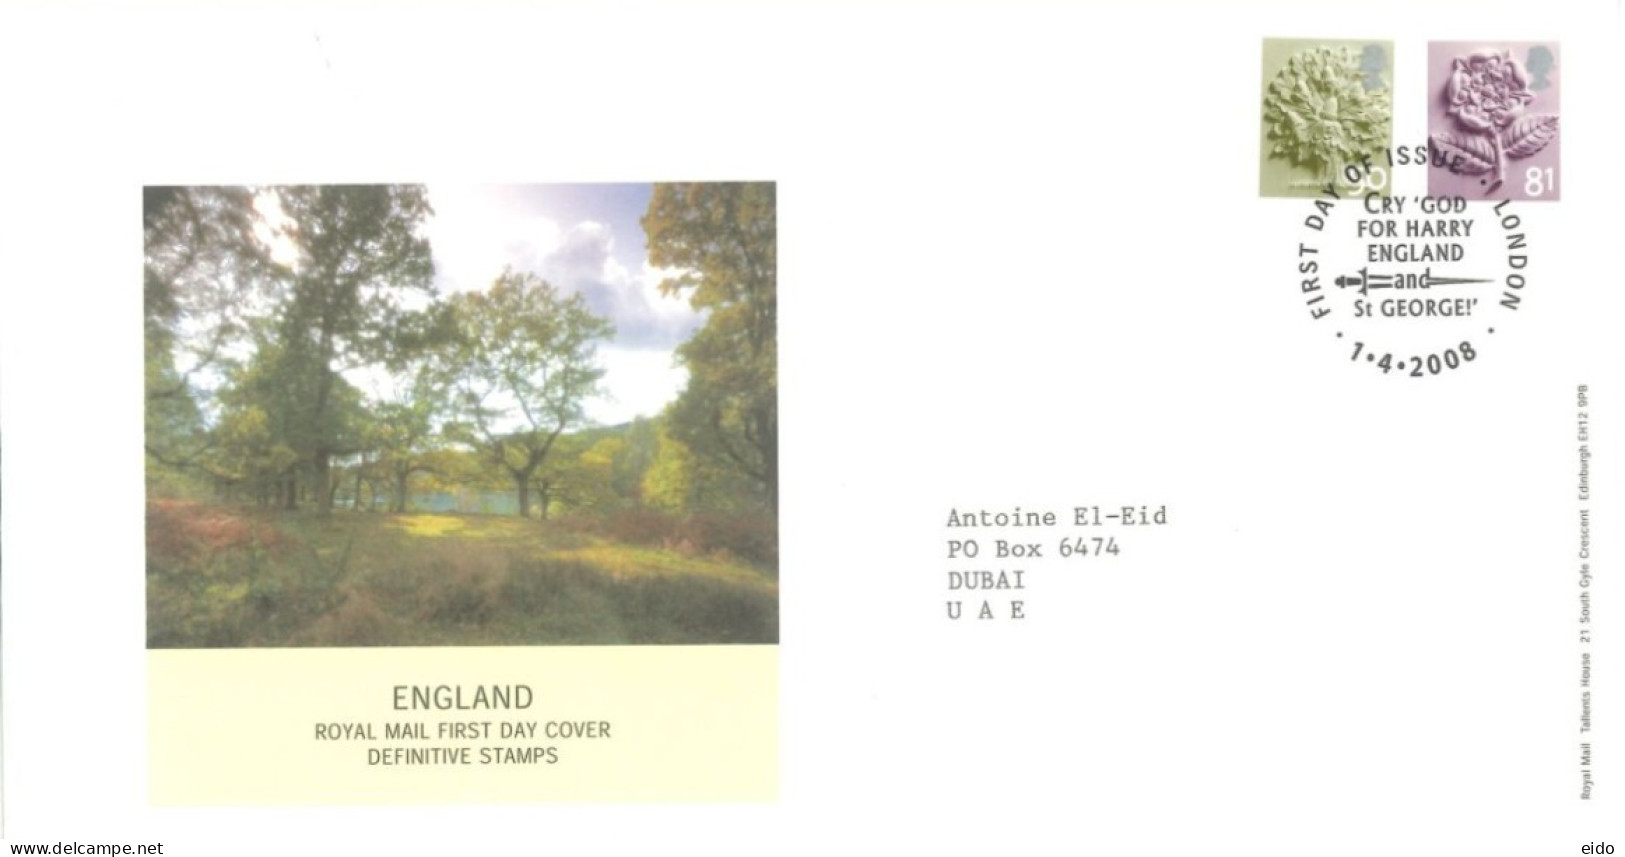 GREAT BRITAIN - 2008, FDC OF ENGLAND ROYAL MAIL DEFINITIVE STAMPS. - Briefe U. Dokumente